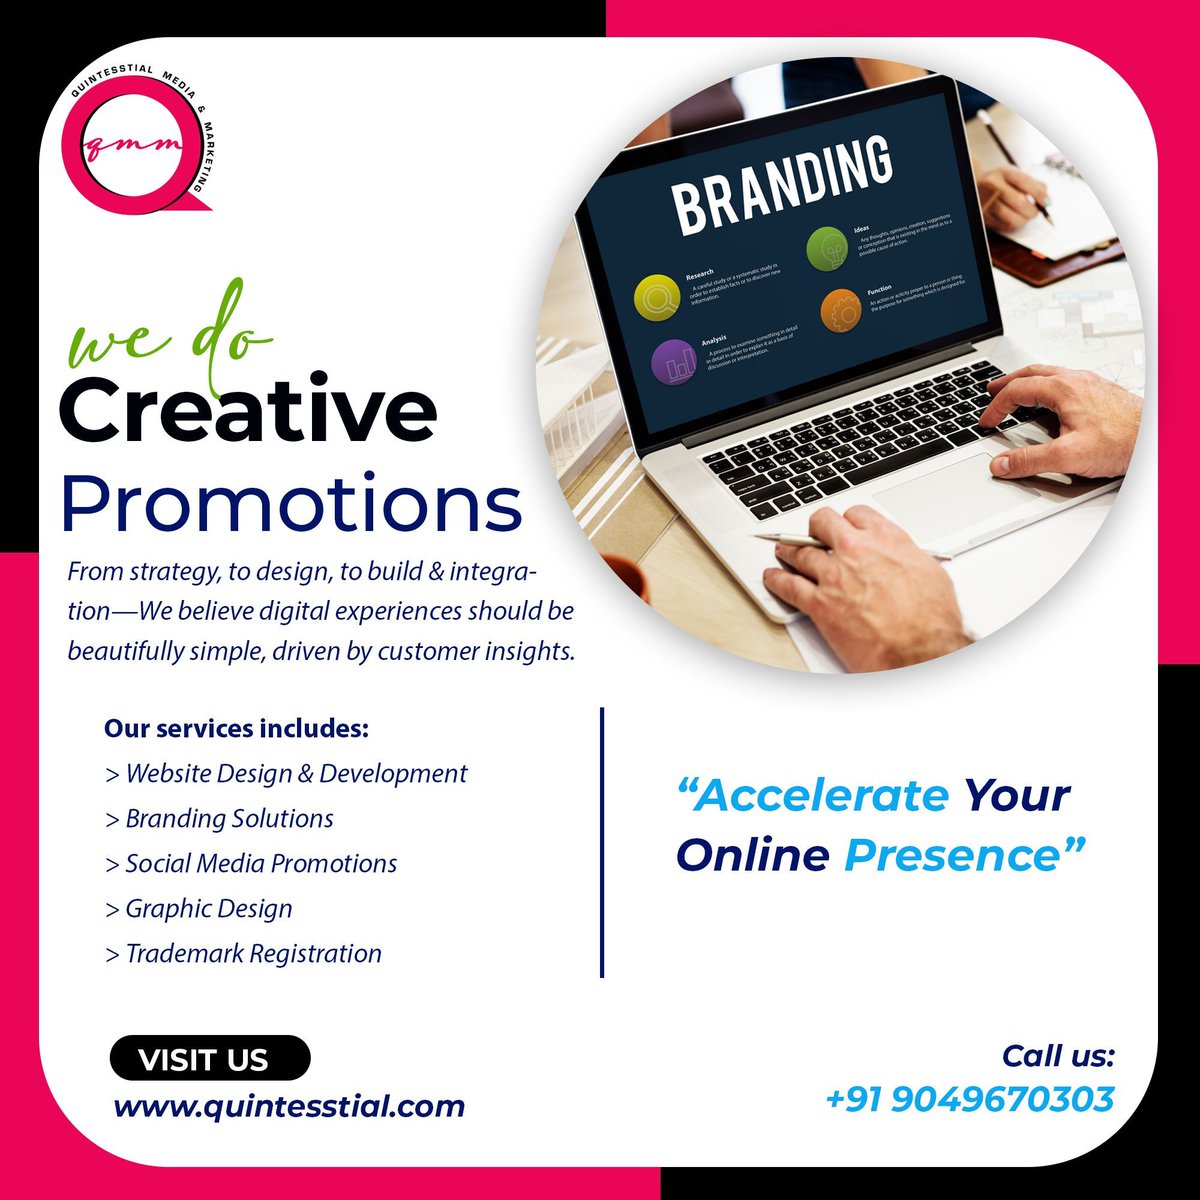 Branding transformation is our forte! Crafting standout logos and powerful online
identities is what we do best. Ready to elevate your brand's identity? Let's kickstart
this journey together—call us now at 9049670303

#quintesstial #qmm #onlinemarketing #businesspromotion